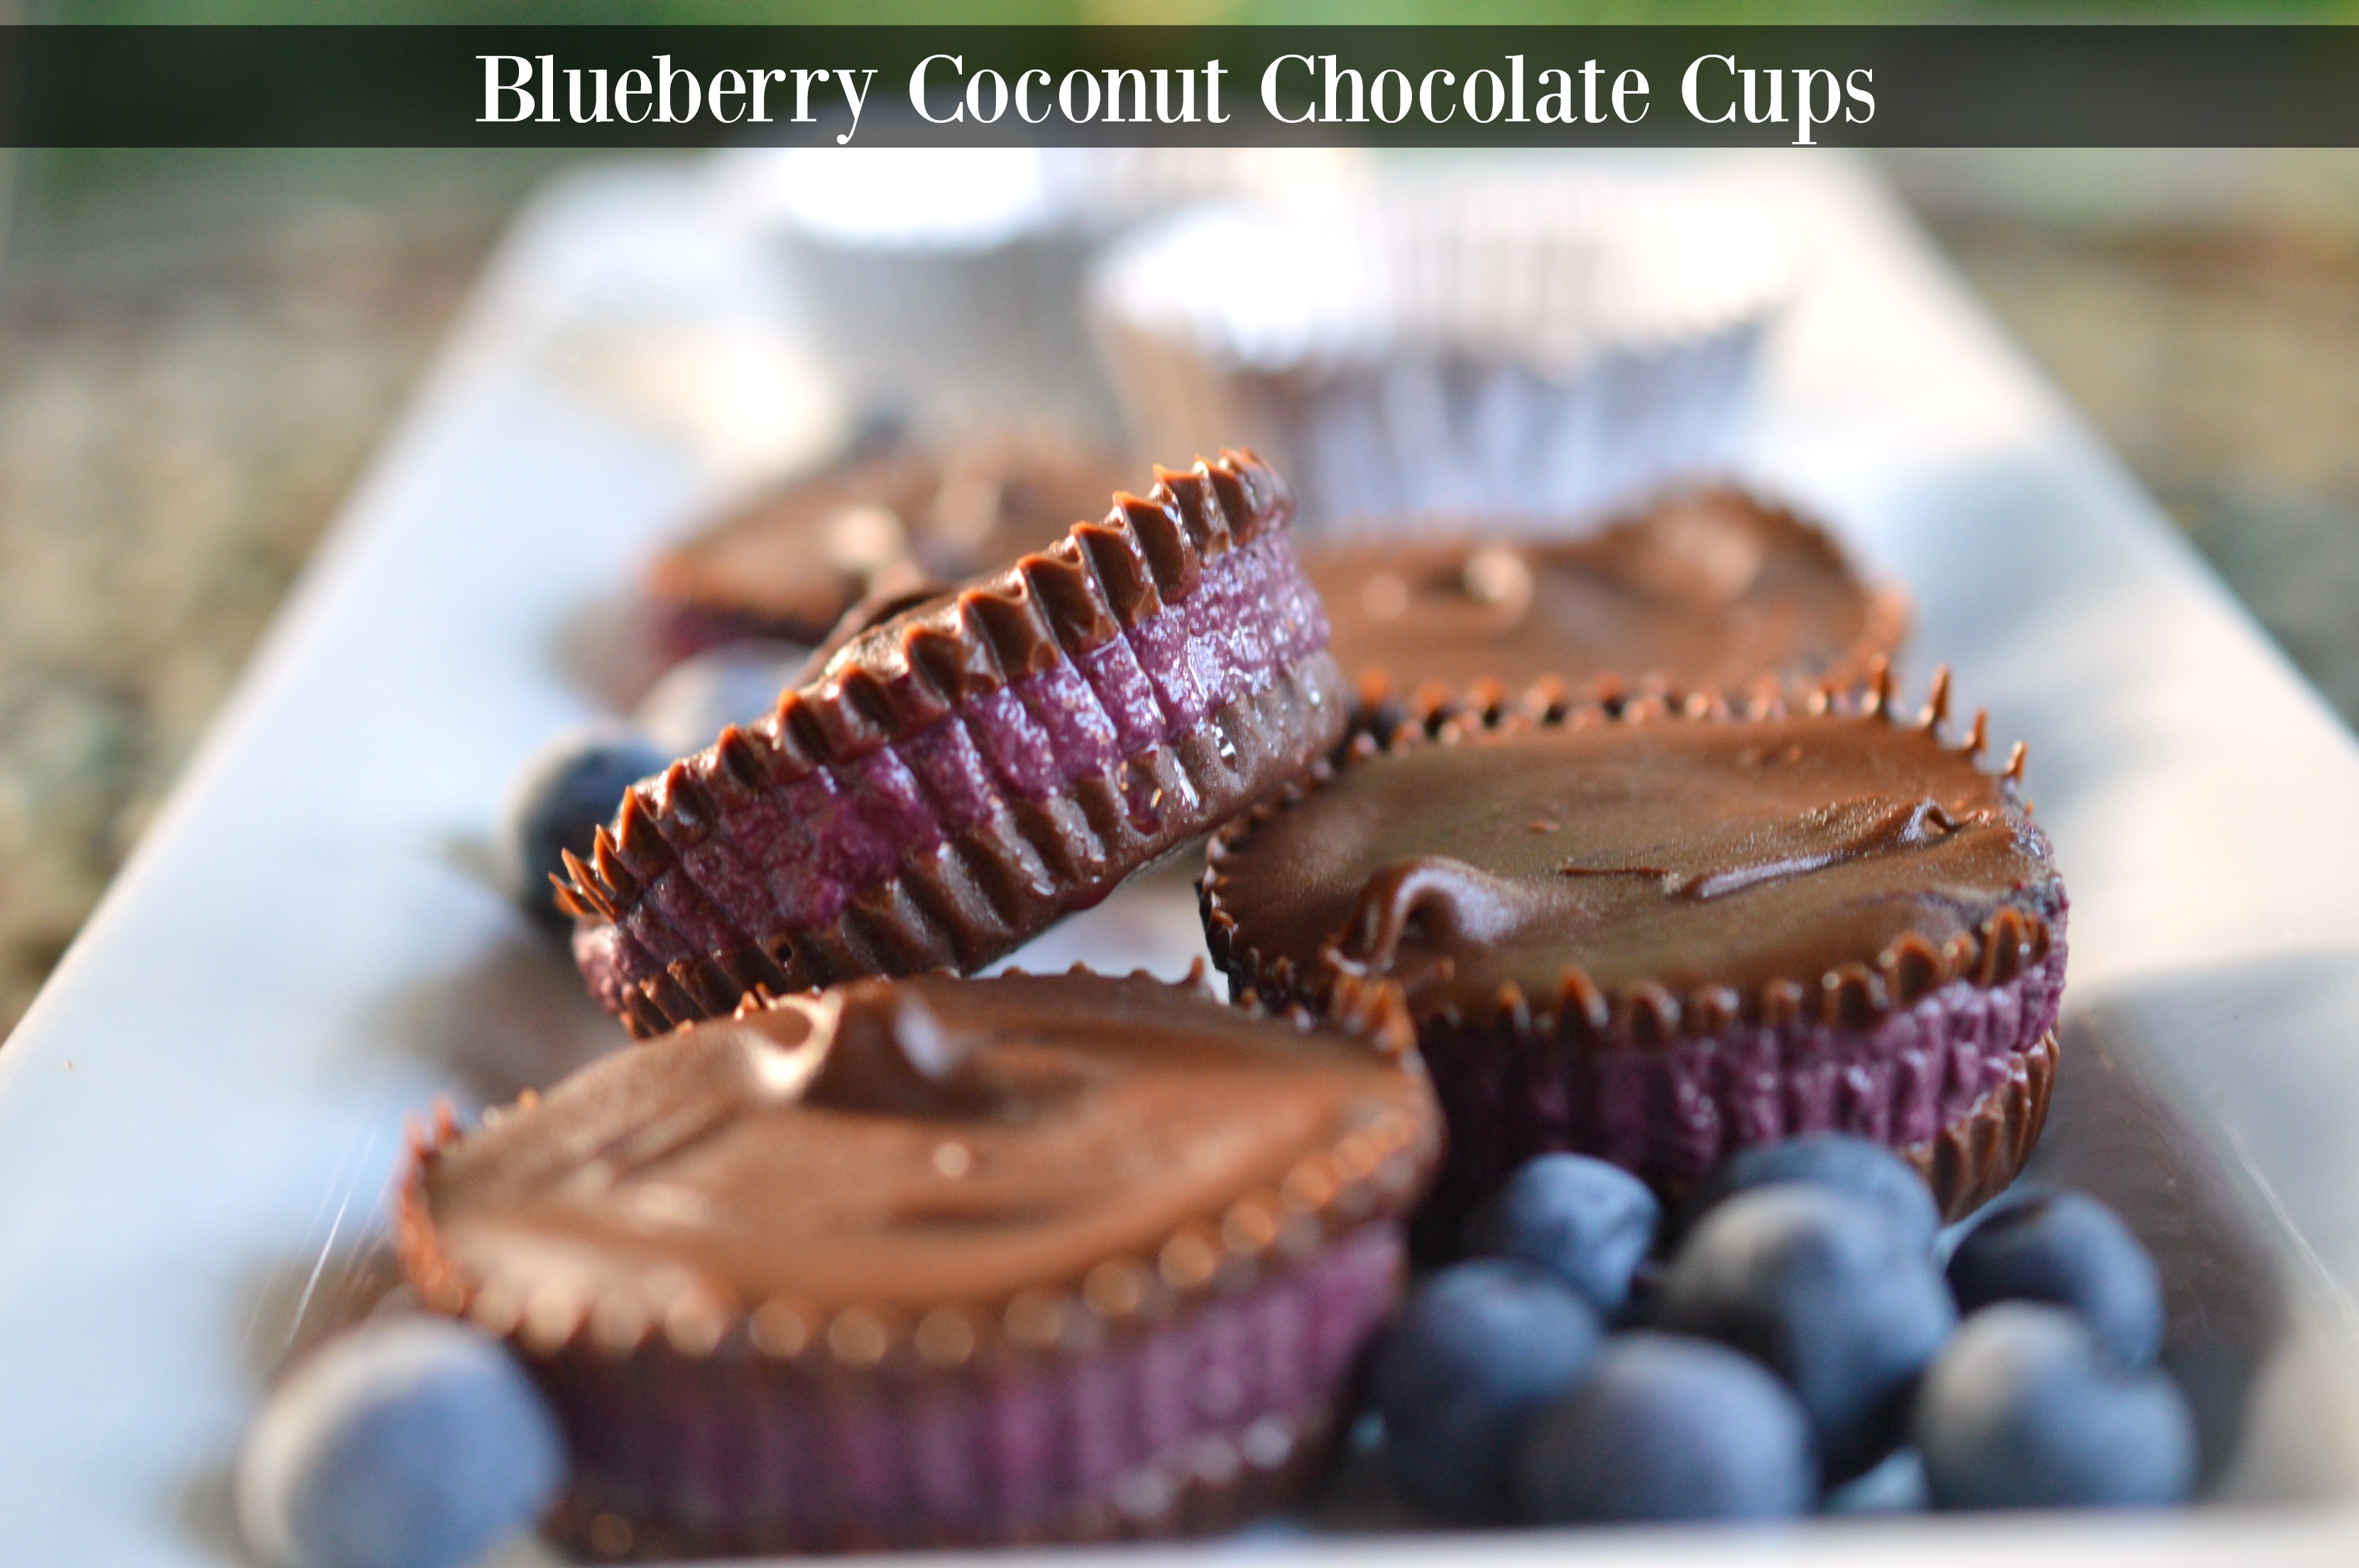 Blueberry Coconut Chocolate Cups